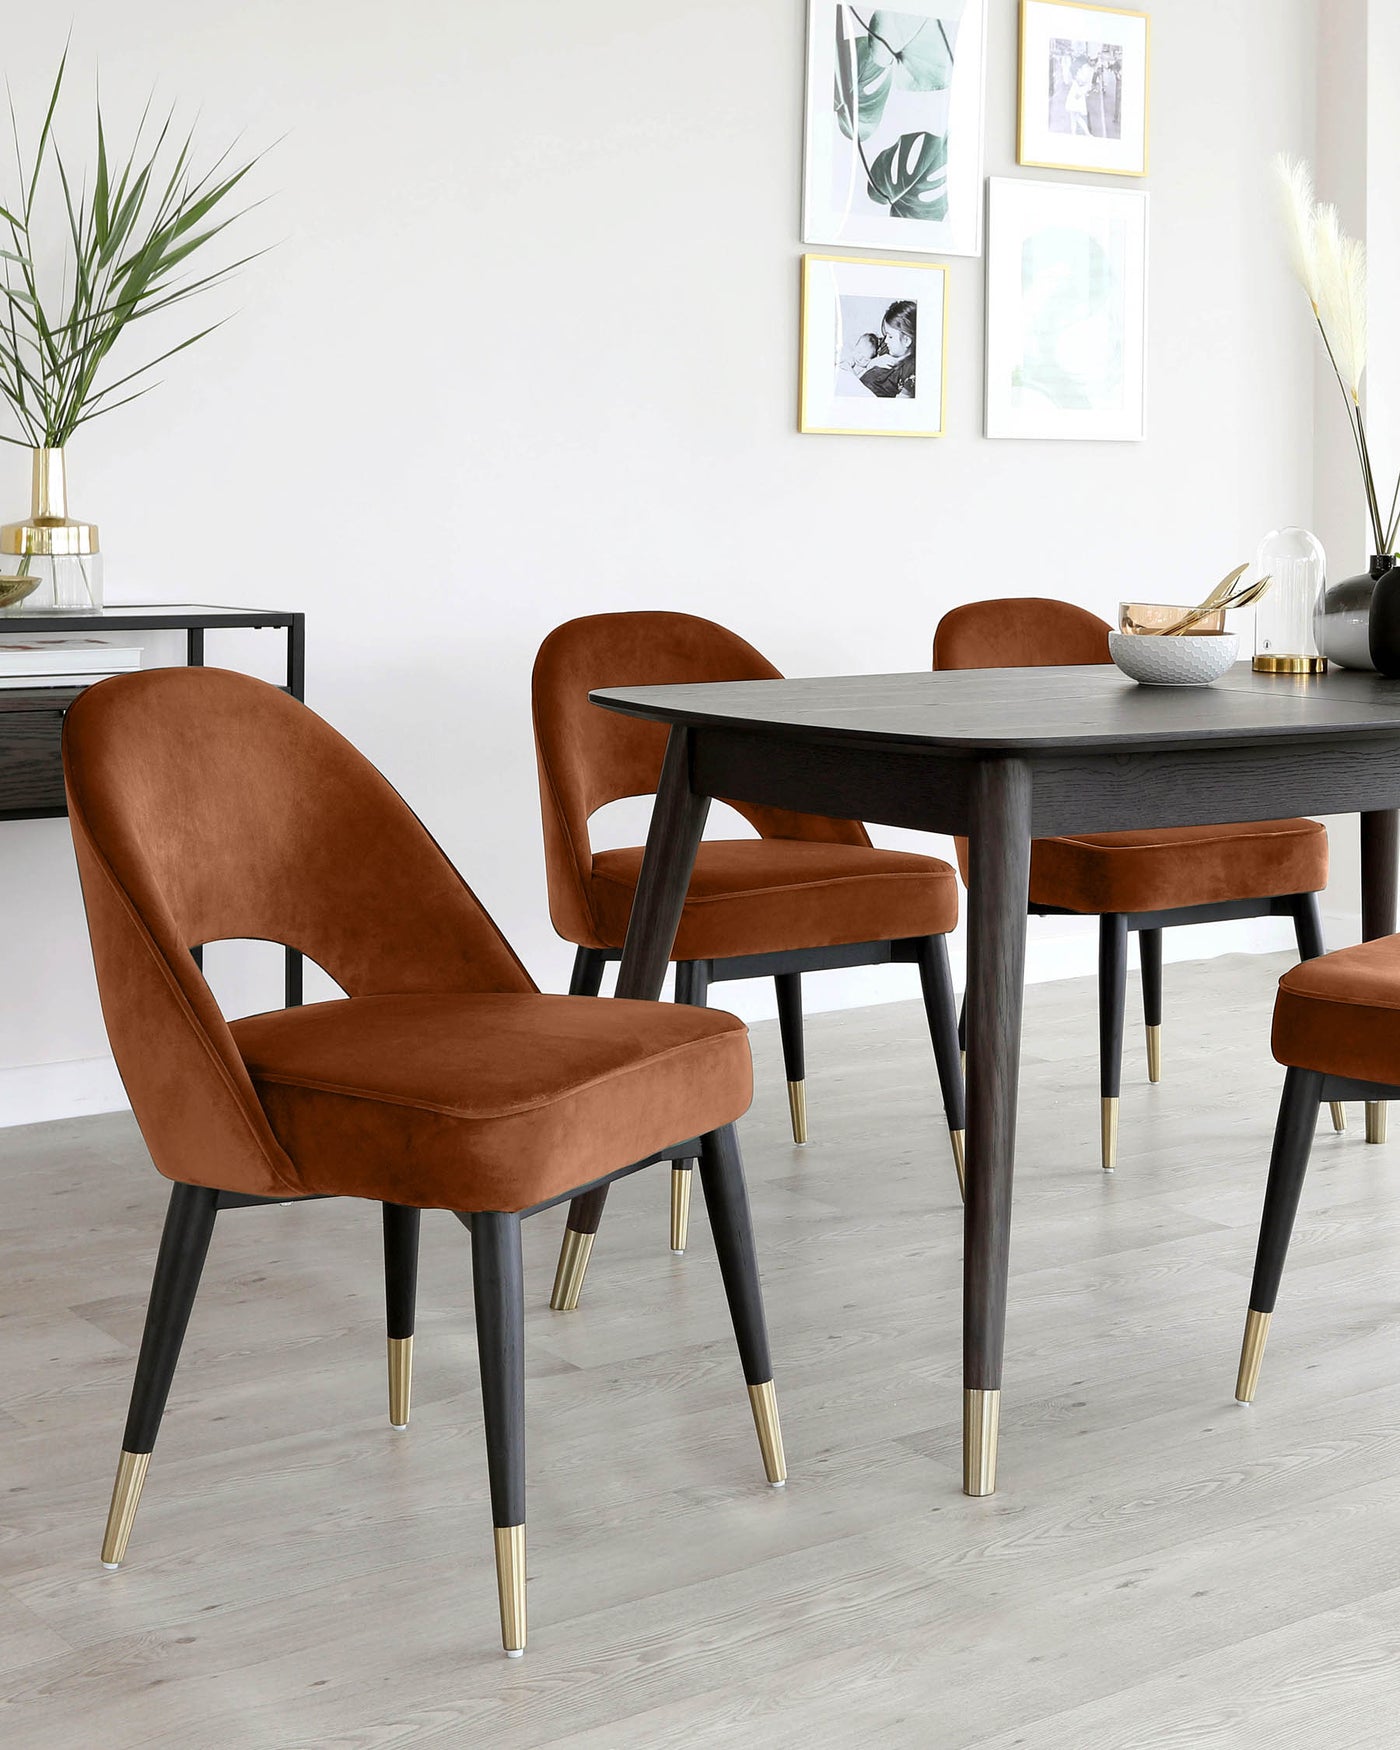 Elegant dining set featuring a modern, dark wood rectangular table with tapered legs, complemented by four luxurious caramel-coloured velvet upholstered chairs with sleek black legs accented with gold metal tips. The set exudes contemporary sophistication, ideal for a stylish interior.